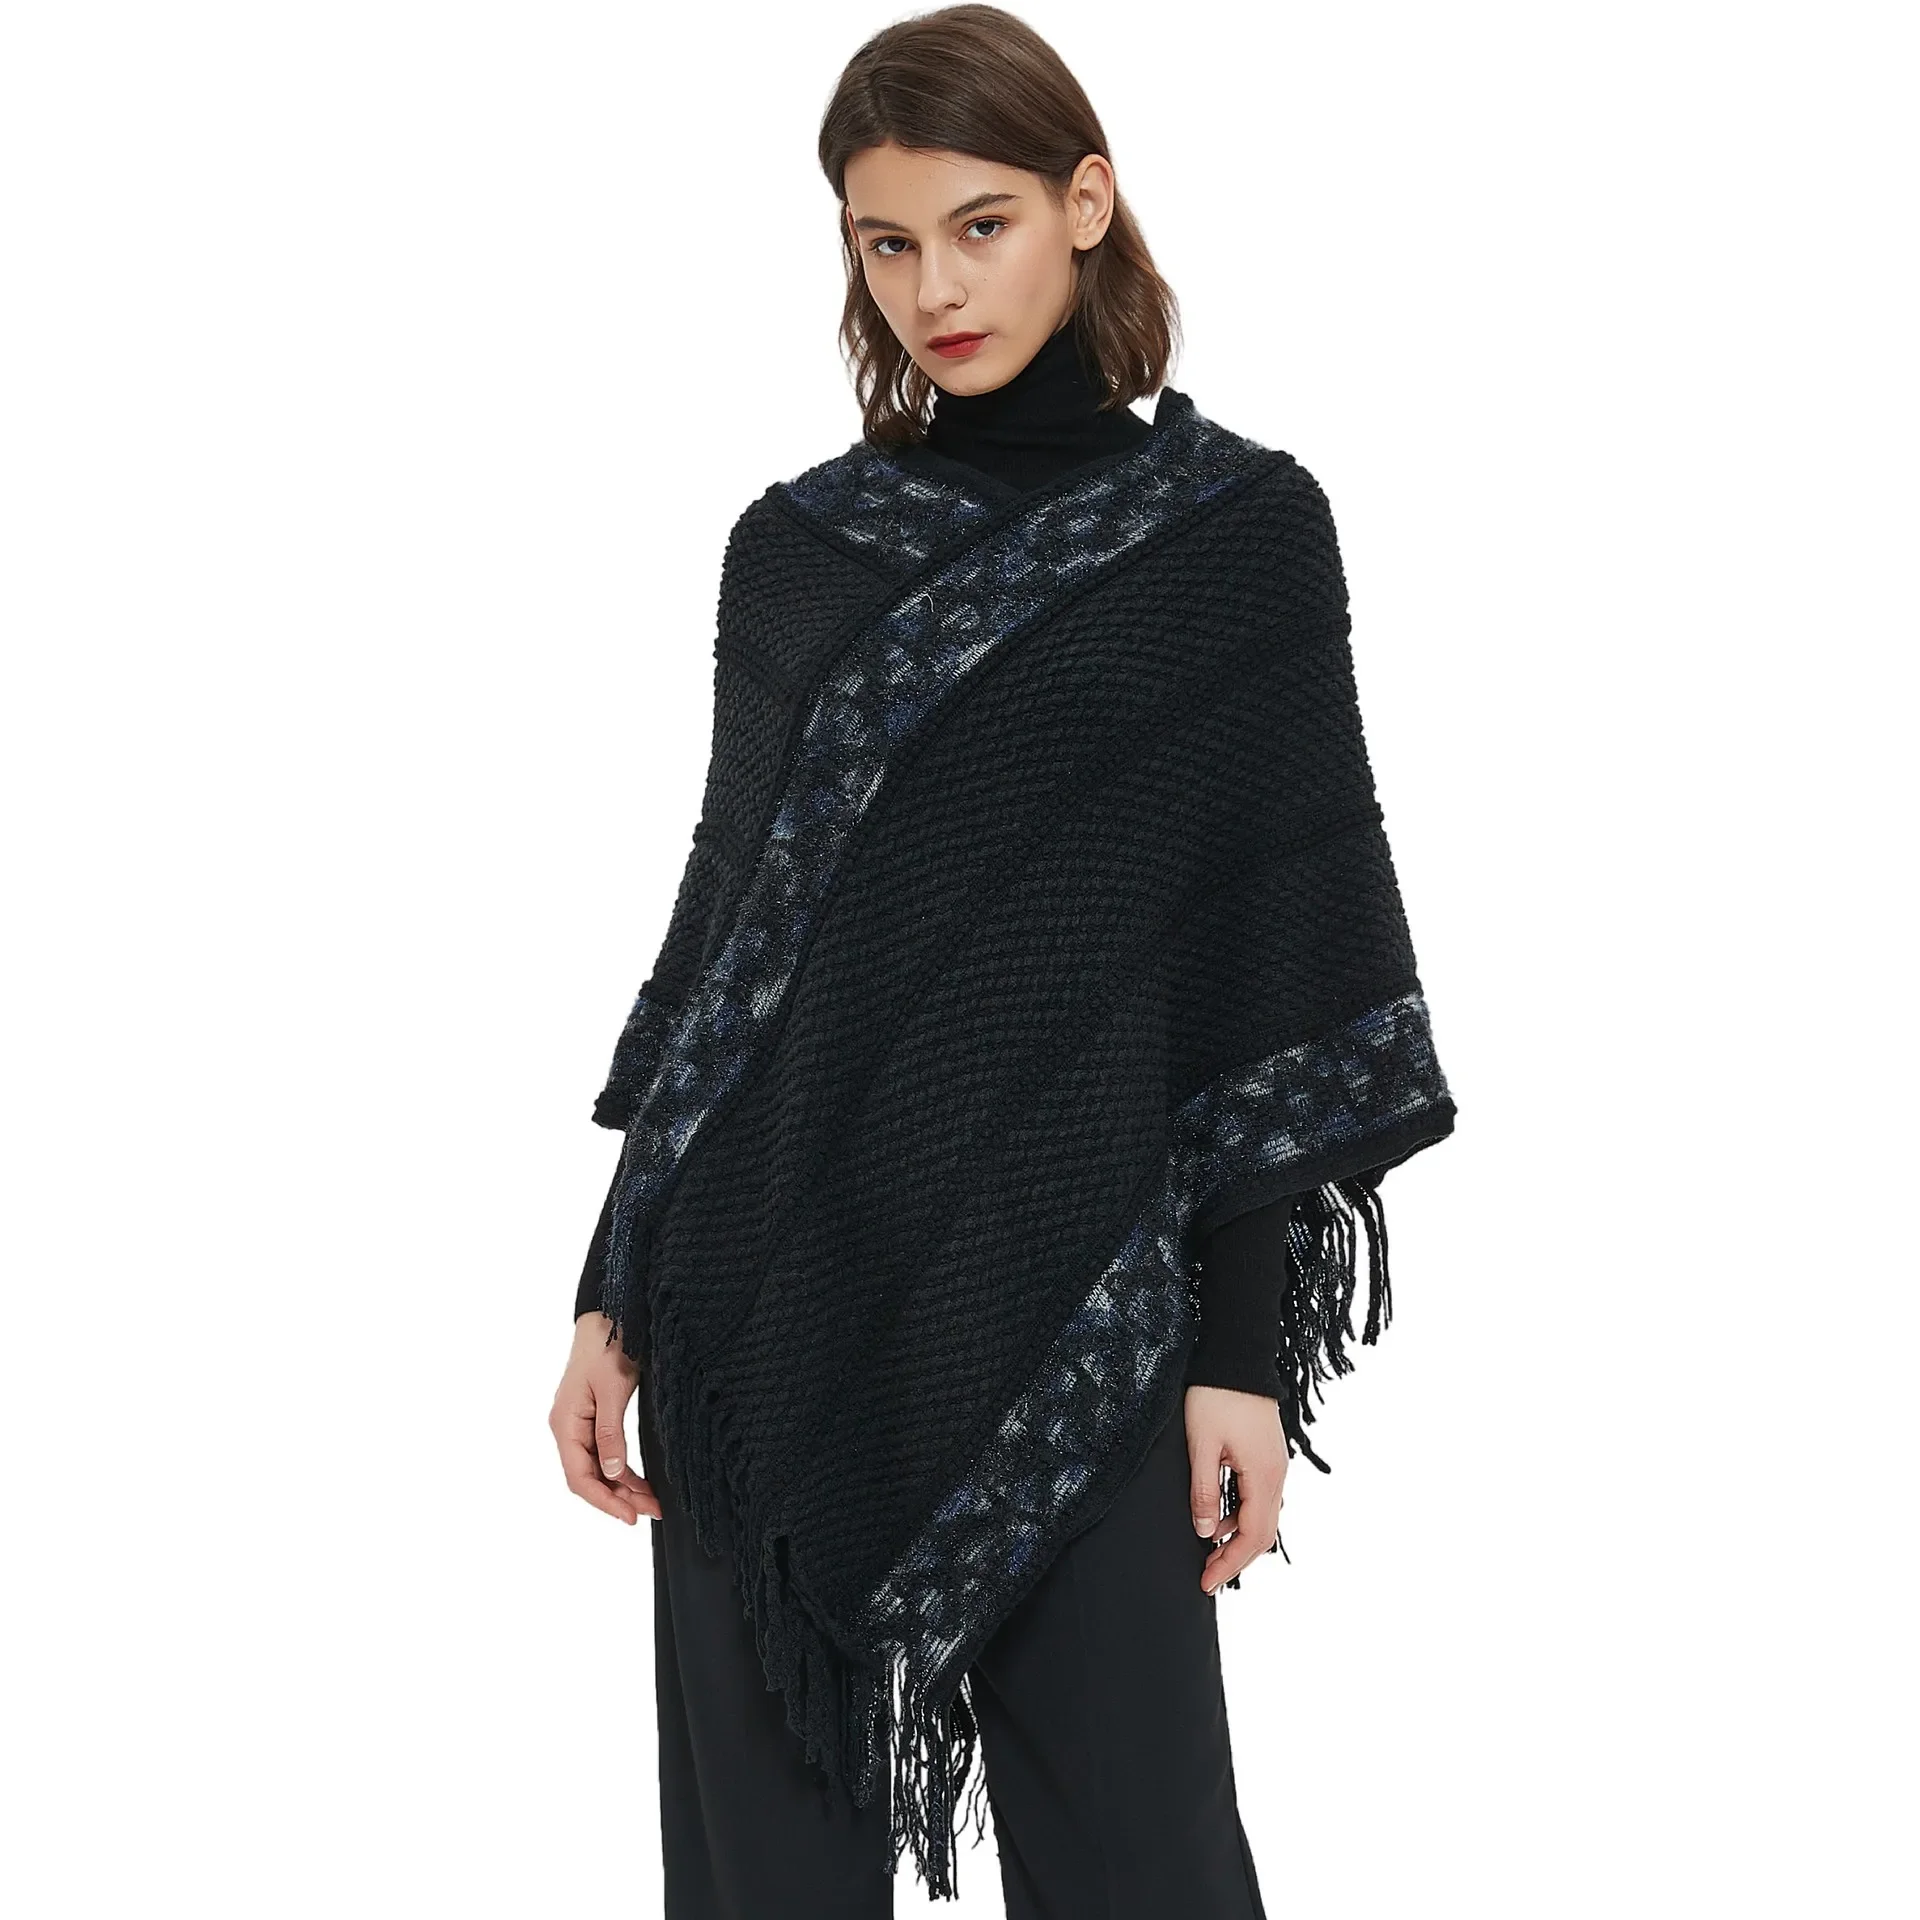 

INS New Luxury Cloak Women Warm Pure Color Wraps Scarf Thick Shawl Ladies Tassel Lace Blanket Winter Pashmina Shawl Cape Tippet